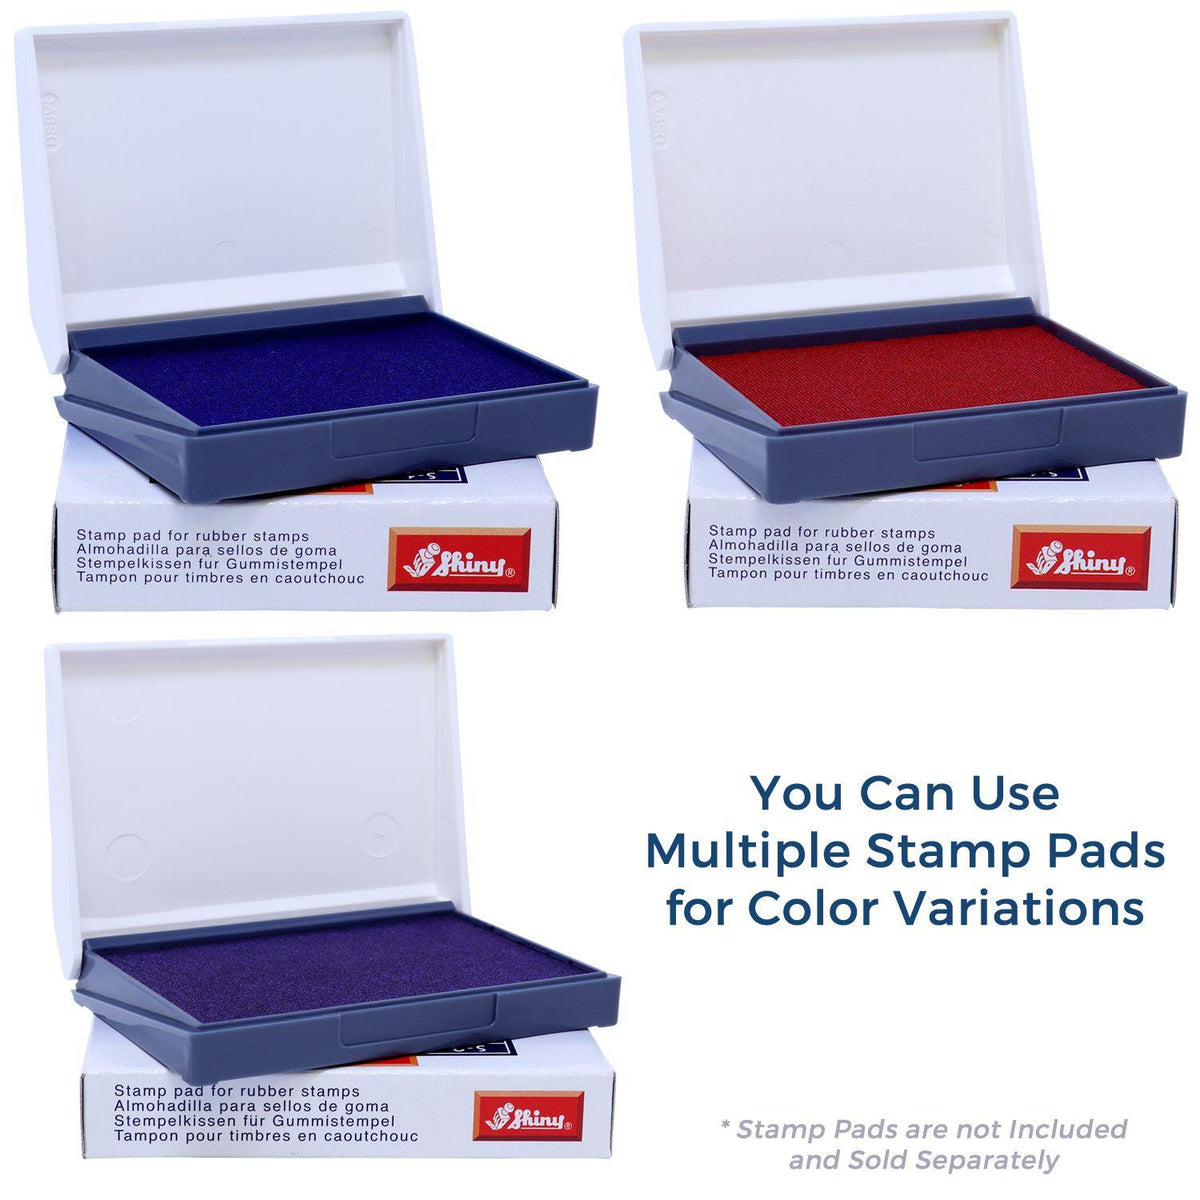 Stamp Pads for Creditors Exhibit Rubber Stamp Available